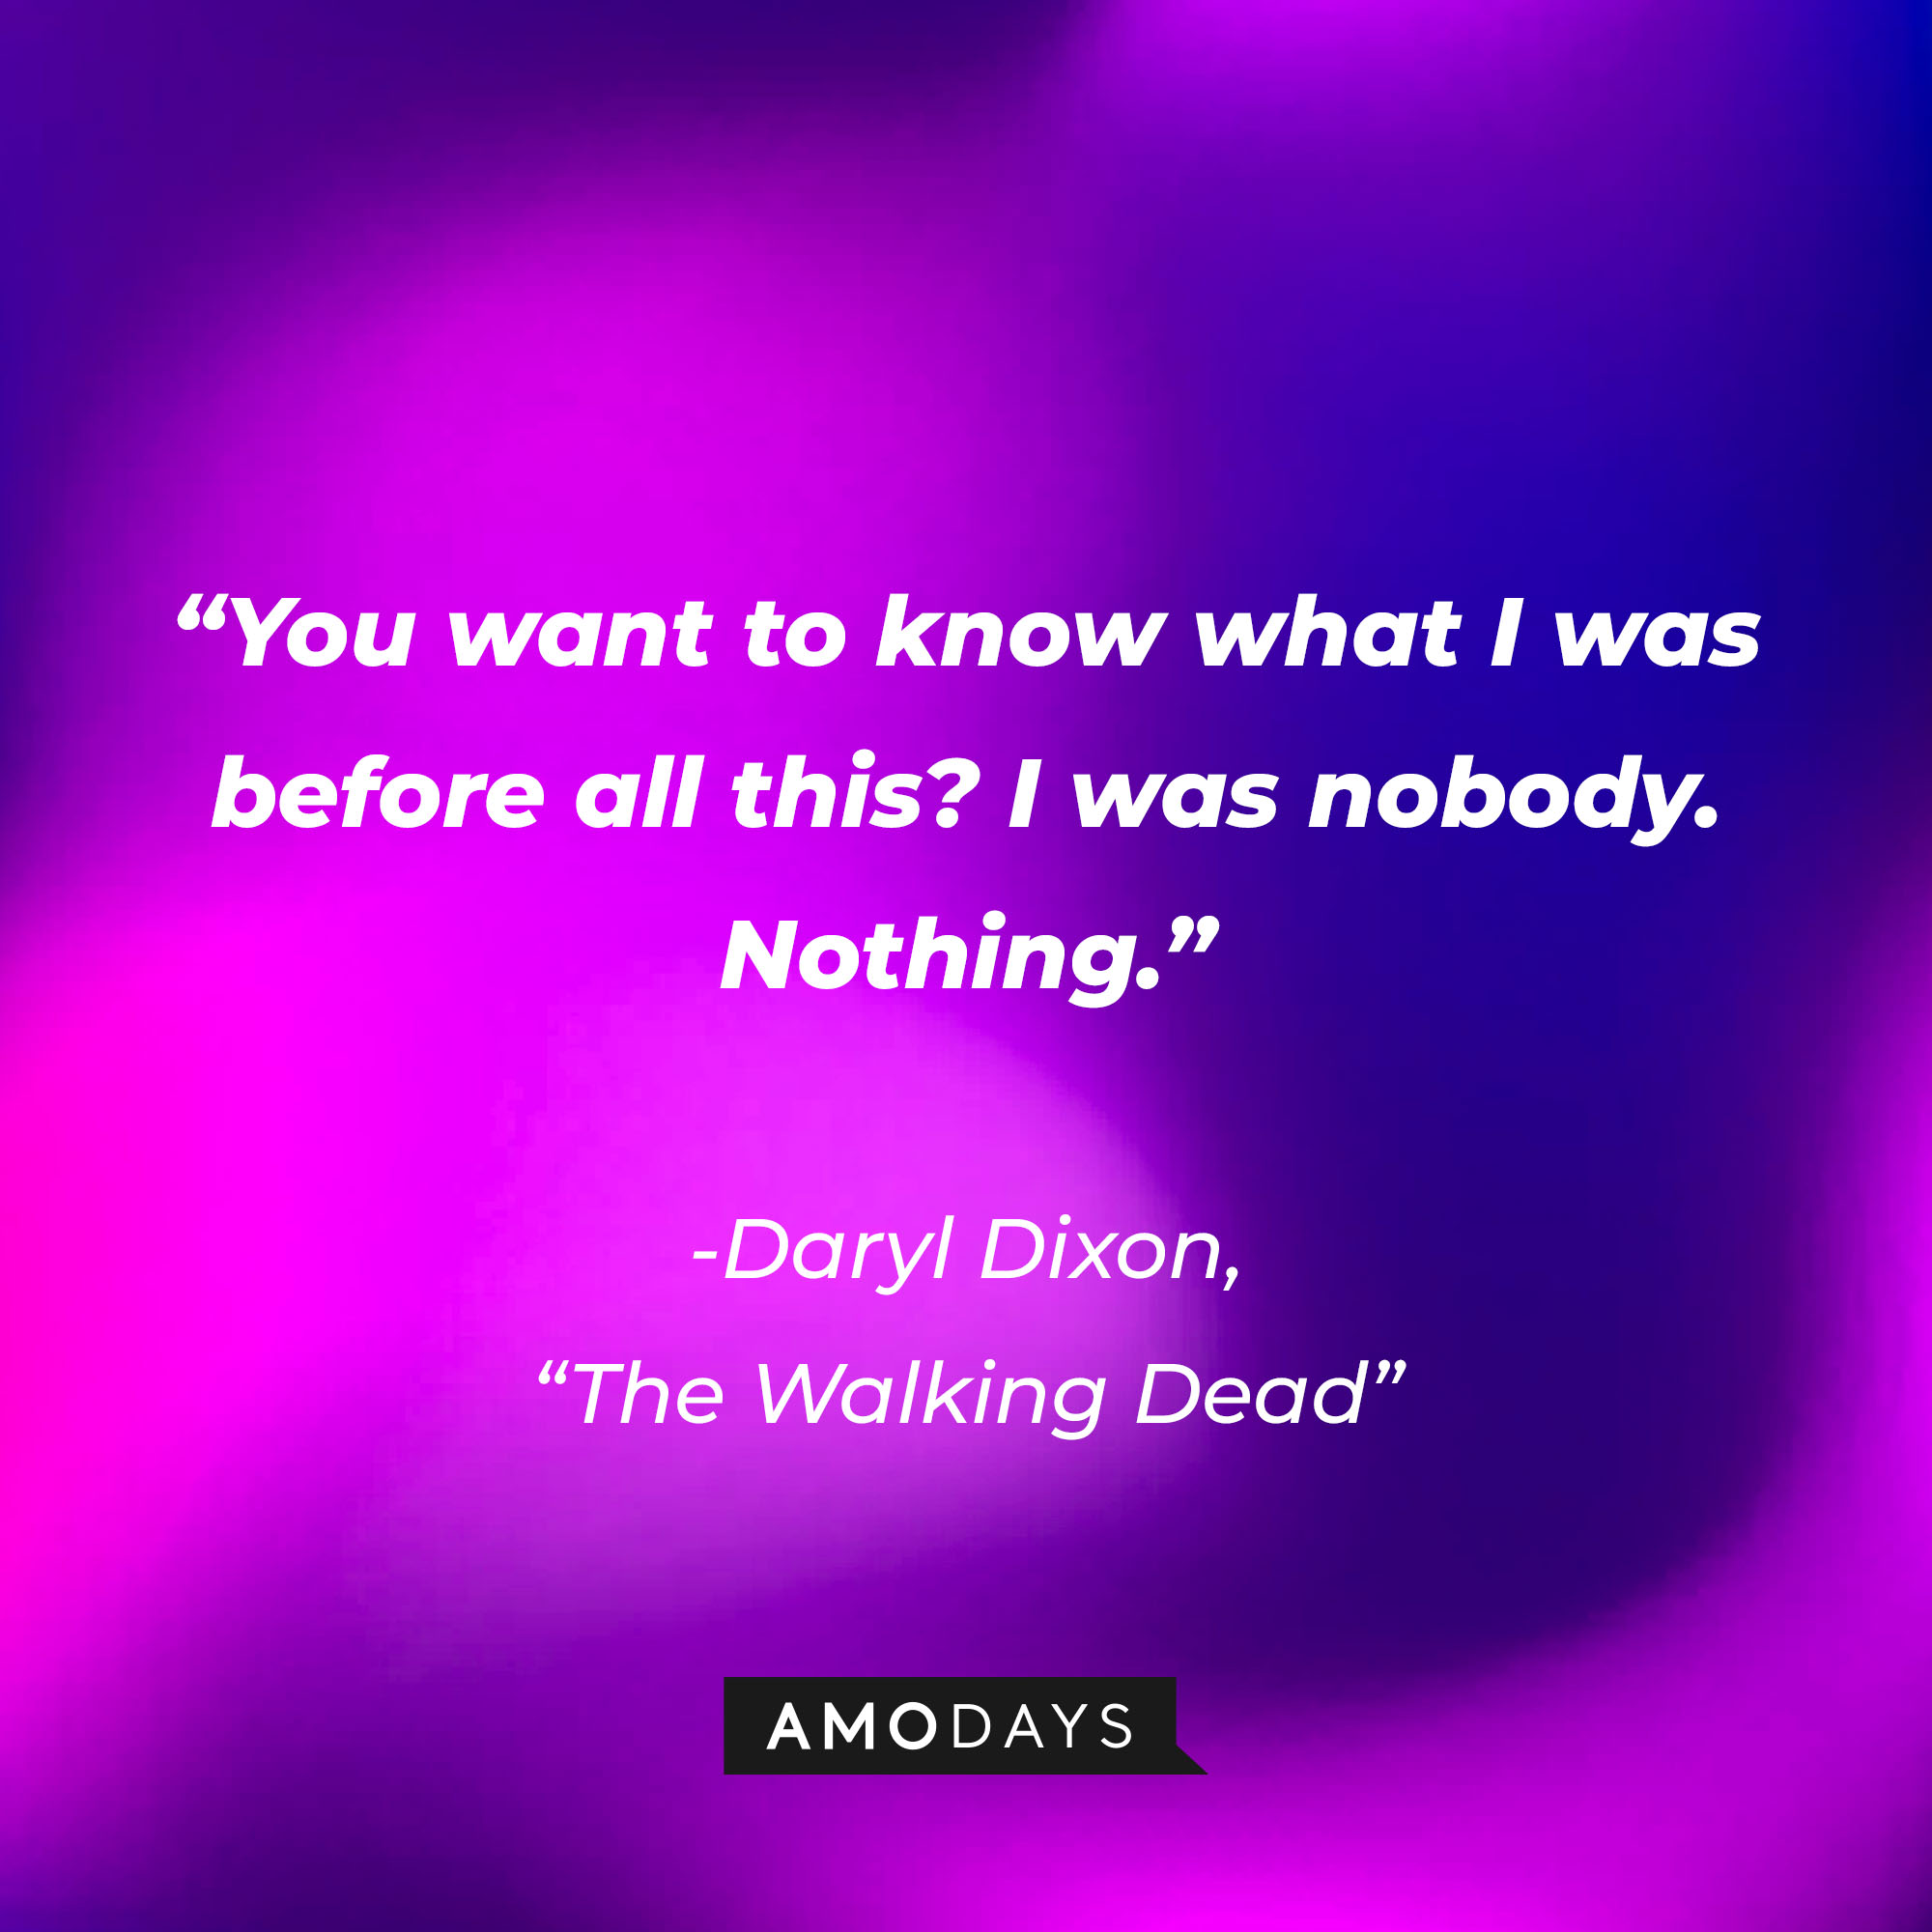 Daryl Dixon’s quote from “The Walking Dead”: “You want to know what I was before all this? I was nobody. Nothing.” | Source: AmoDays